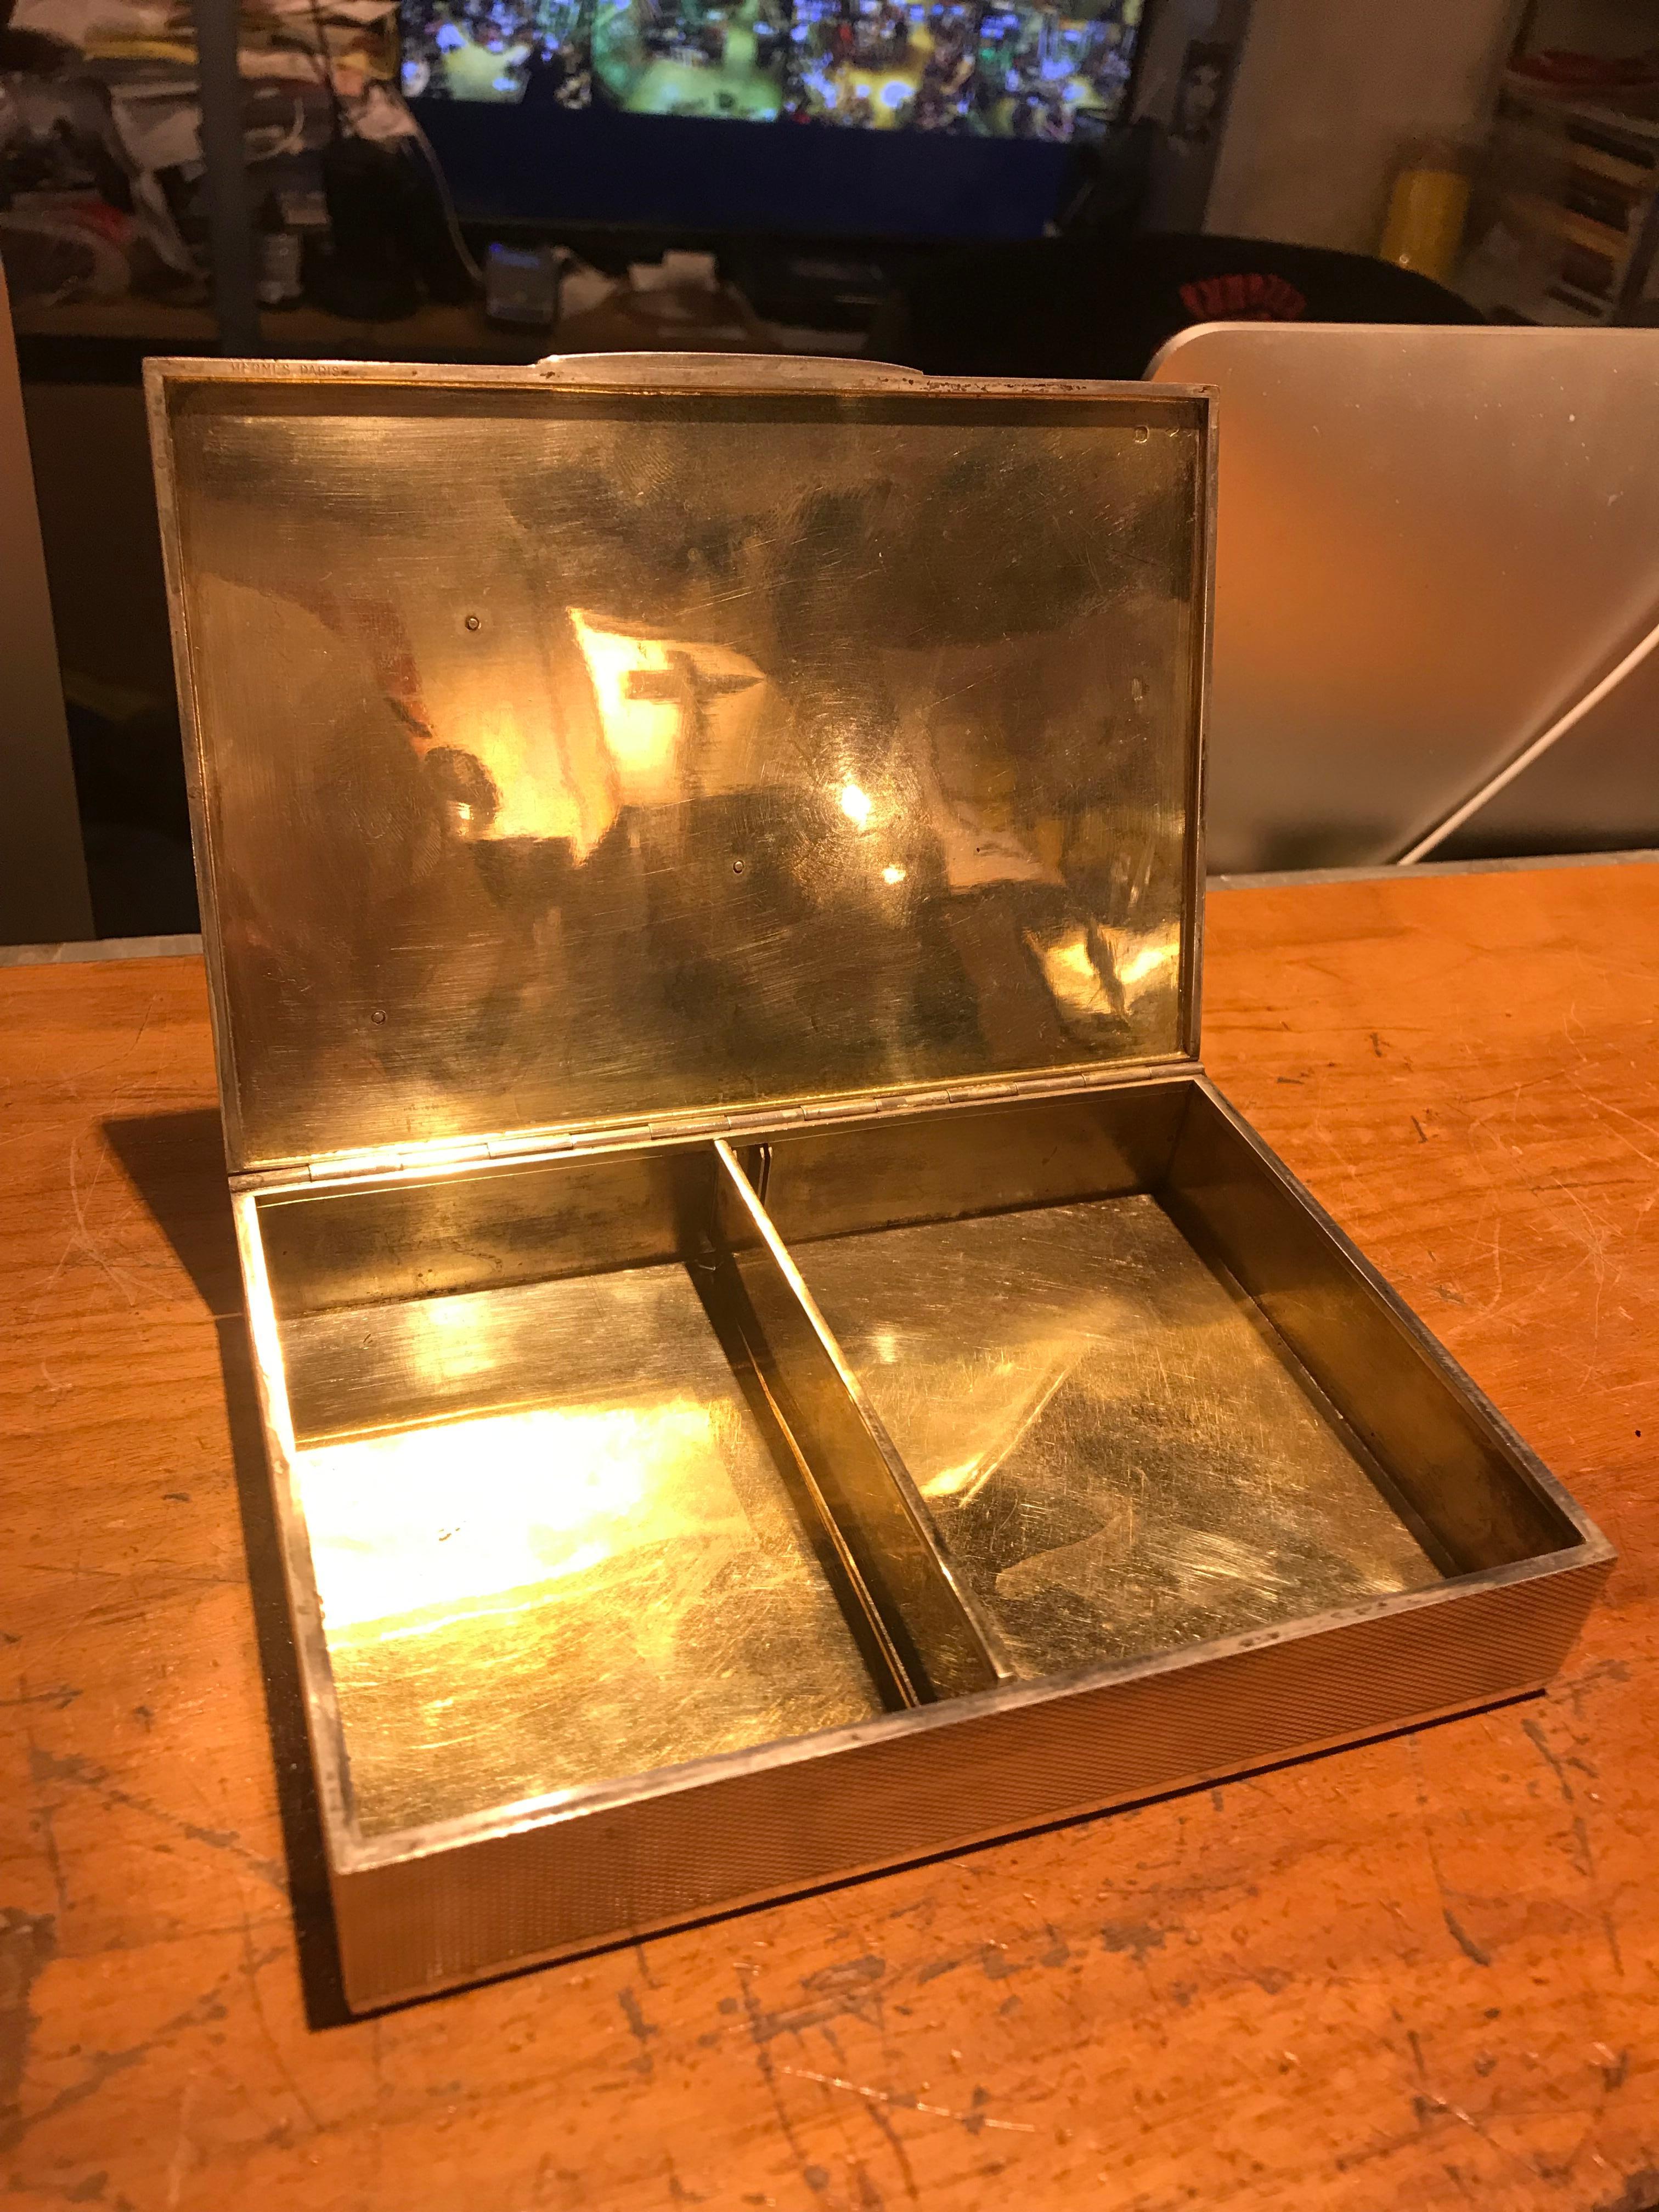 A fine and rare example of a sterling Hermes desk object. Complete with their anchor motif and incredible engine turned texture, this box would be perfect for any coffee table or desk. Fantastic condition and look for its age.